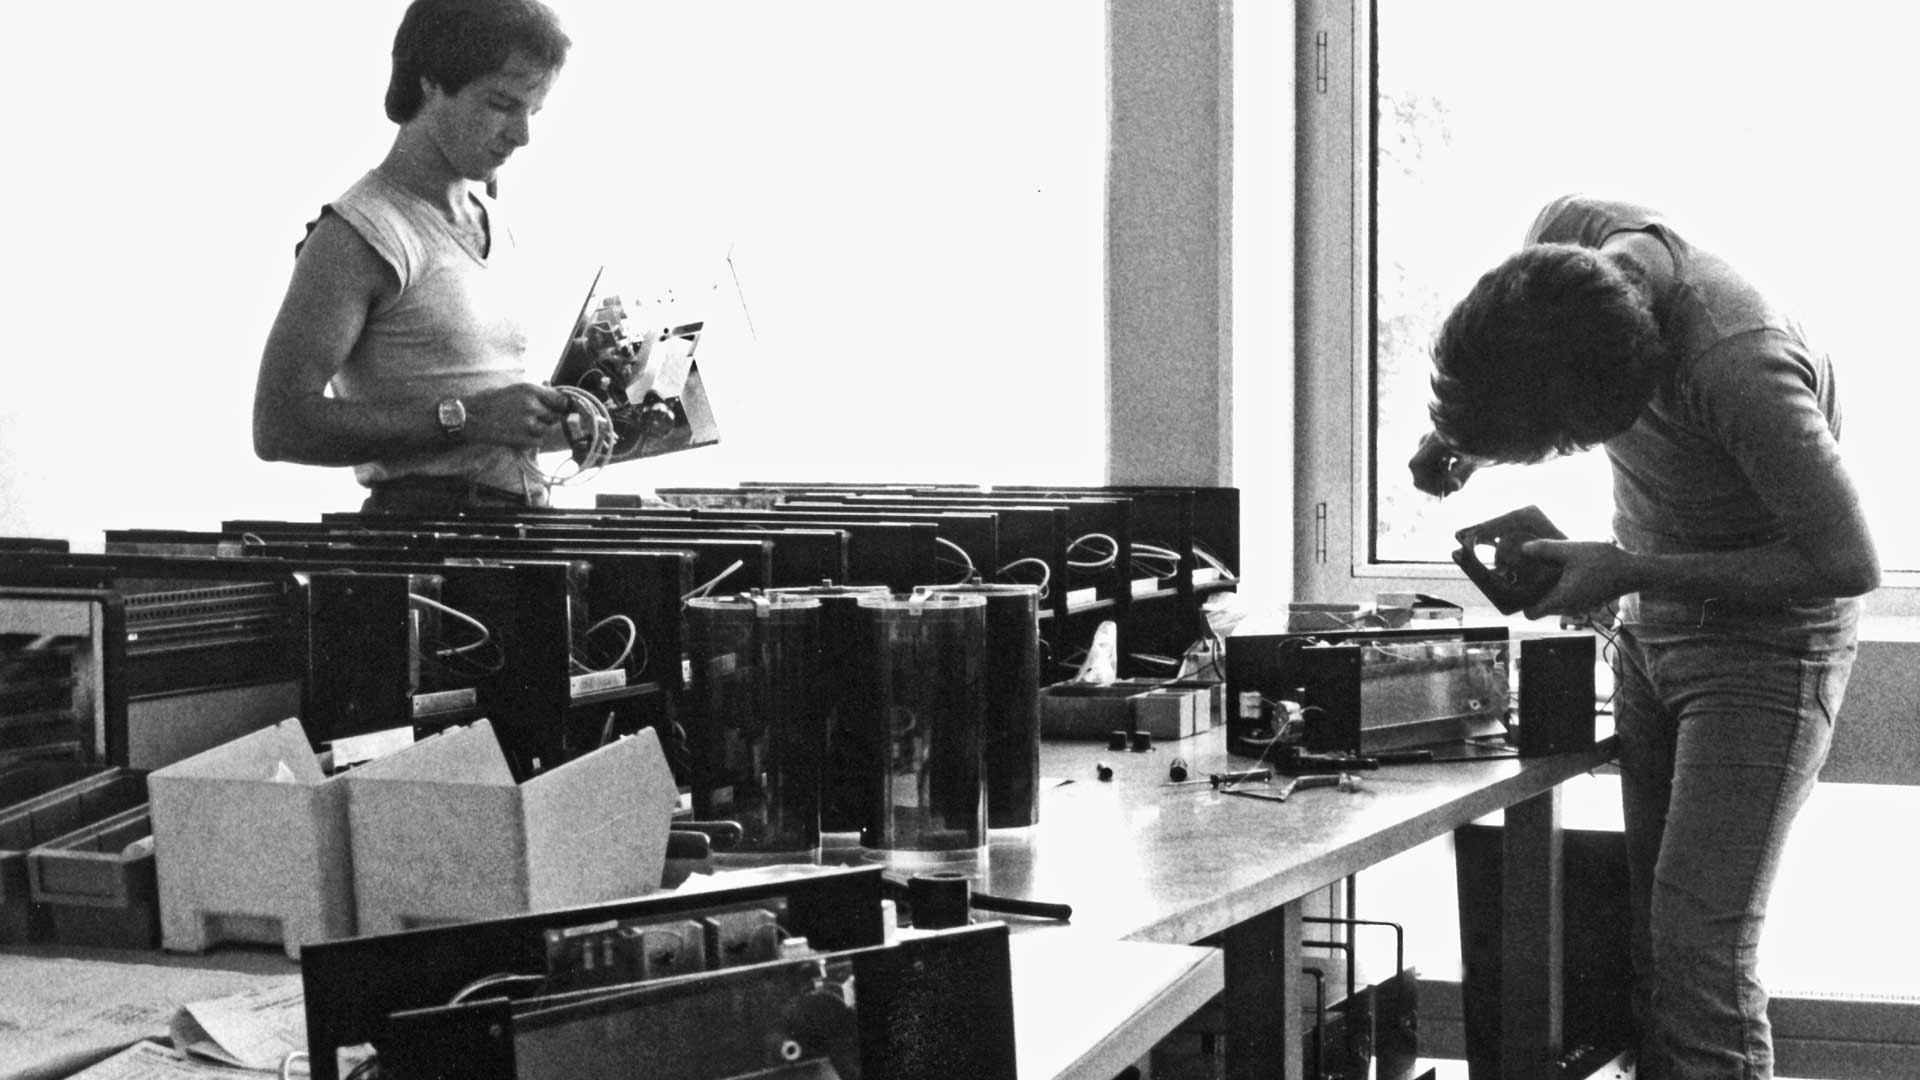 GS and employees in the production of the world's first color changer stroboscope (1985).